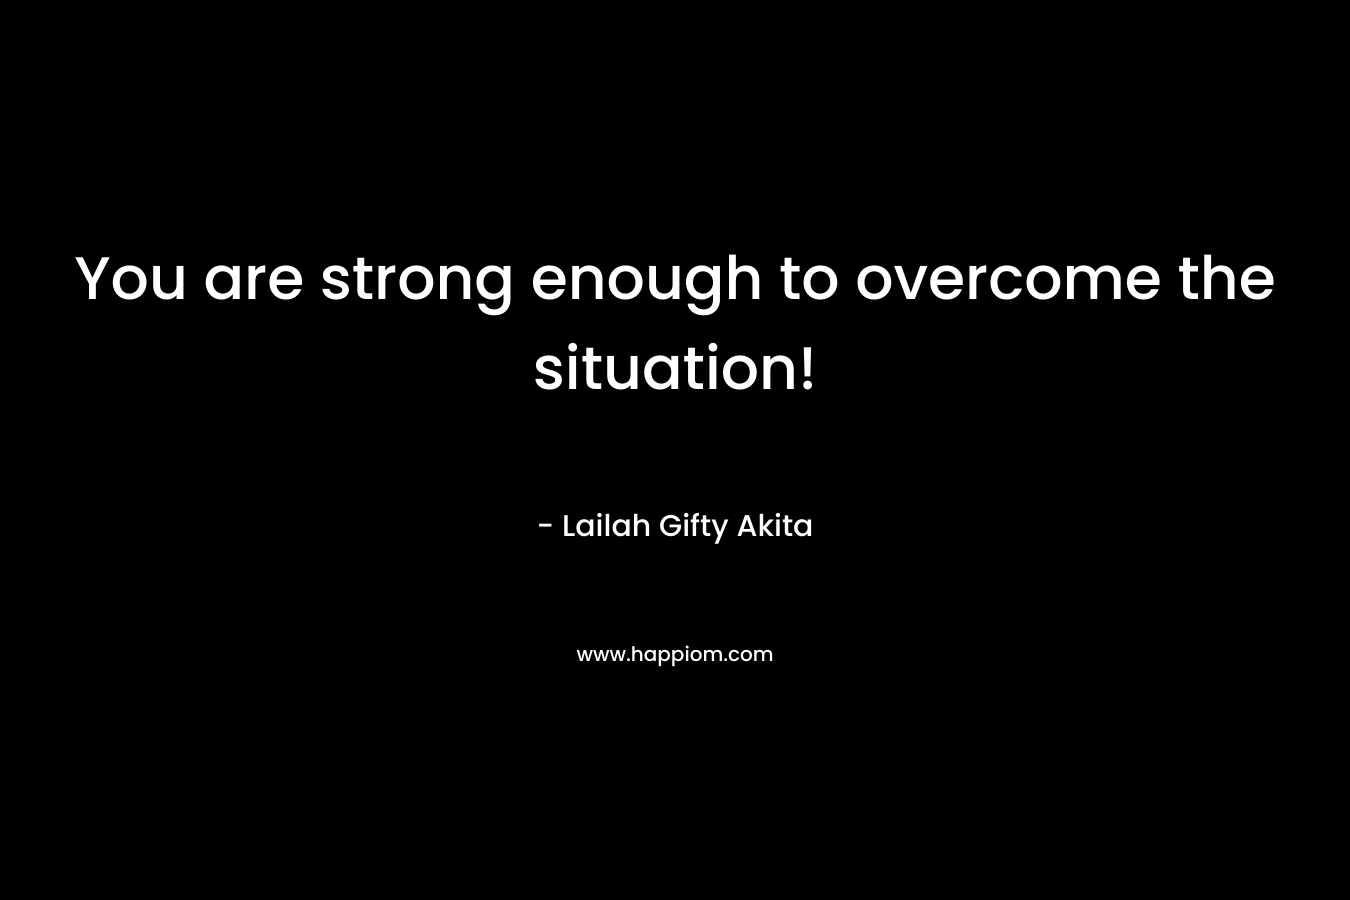 You are strong enough to overcome the situation! – Lailah Gifty Akita